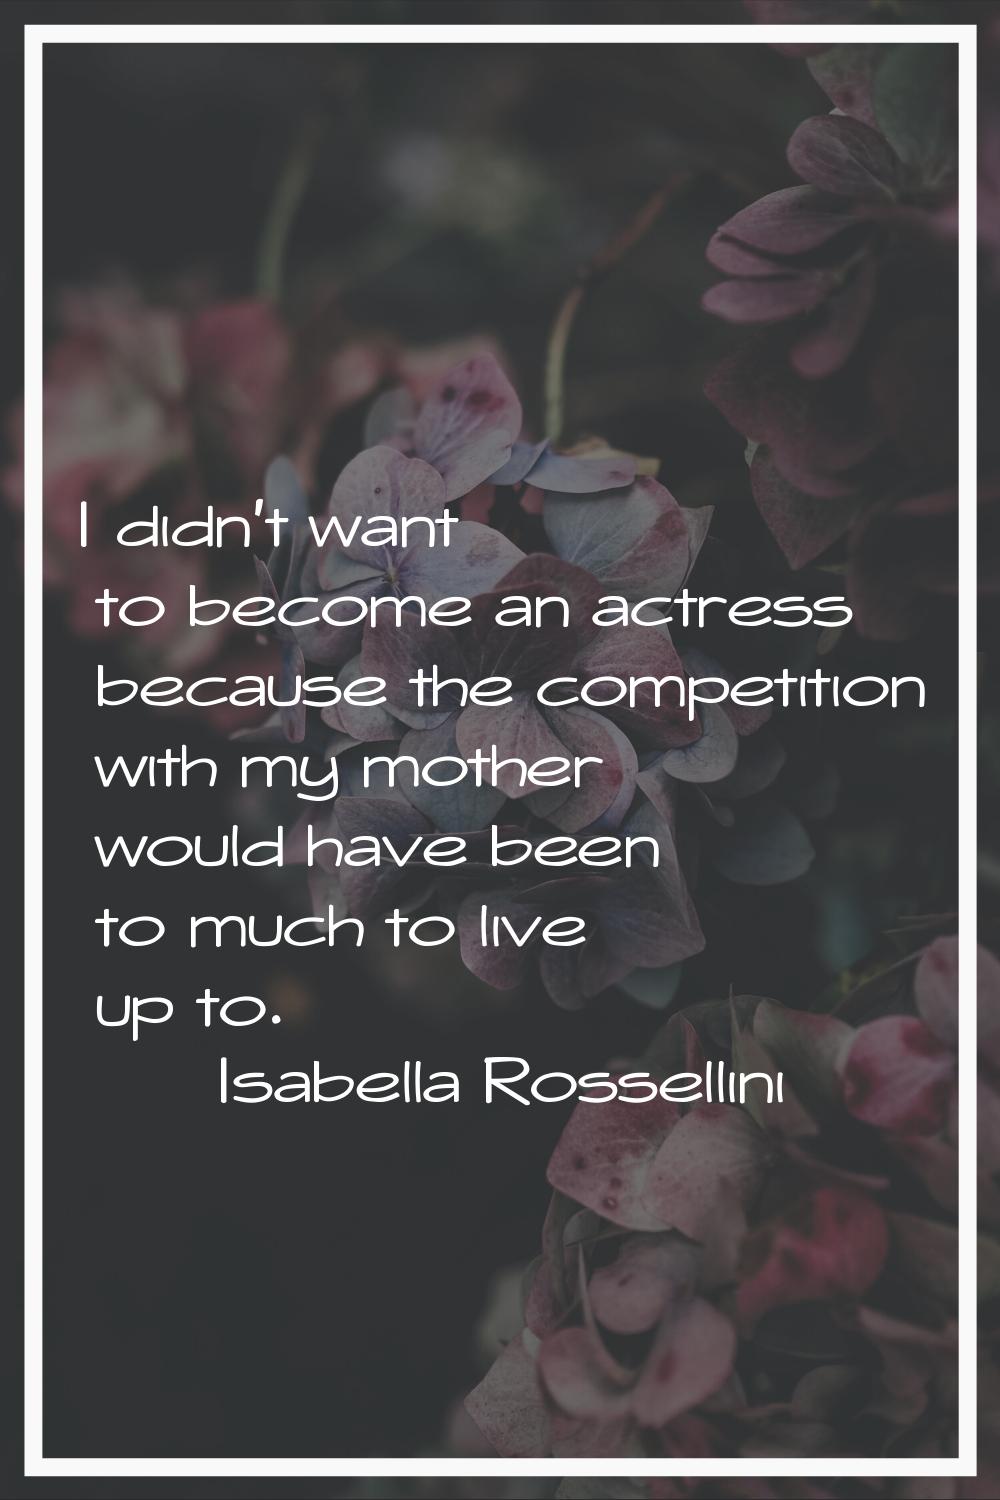 I didn't want to become an actress because the competition with my mother would have been to much t